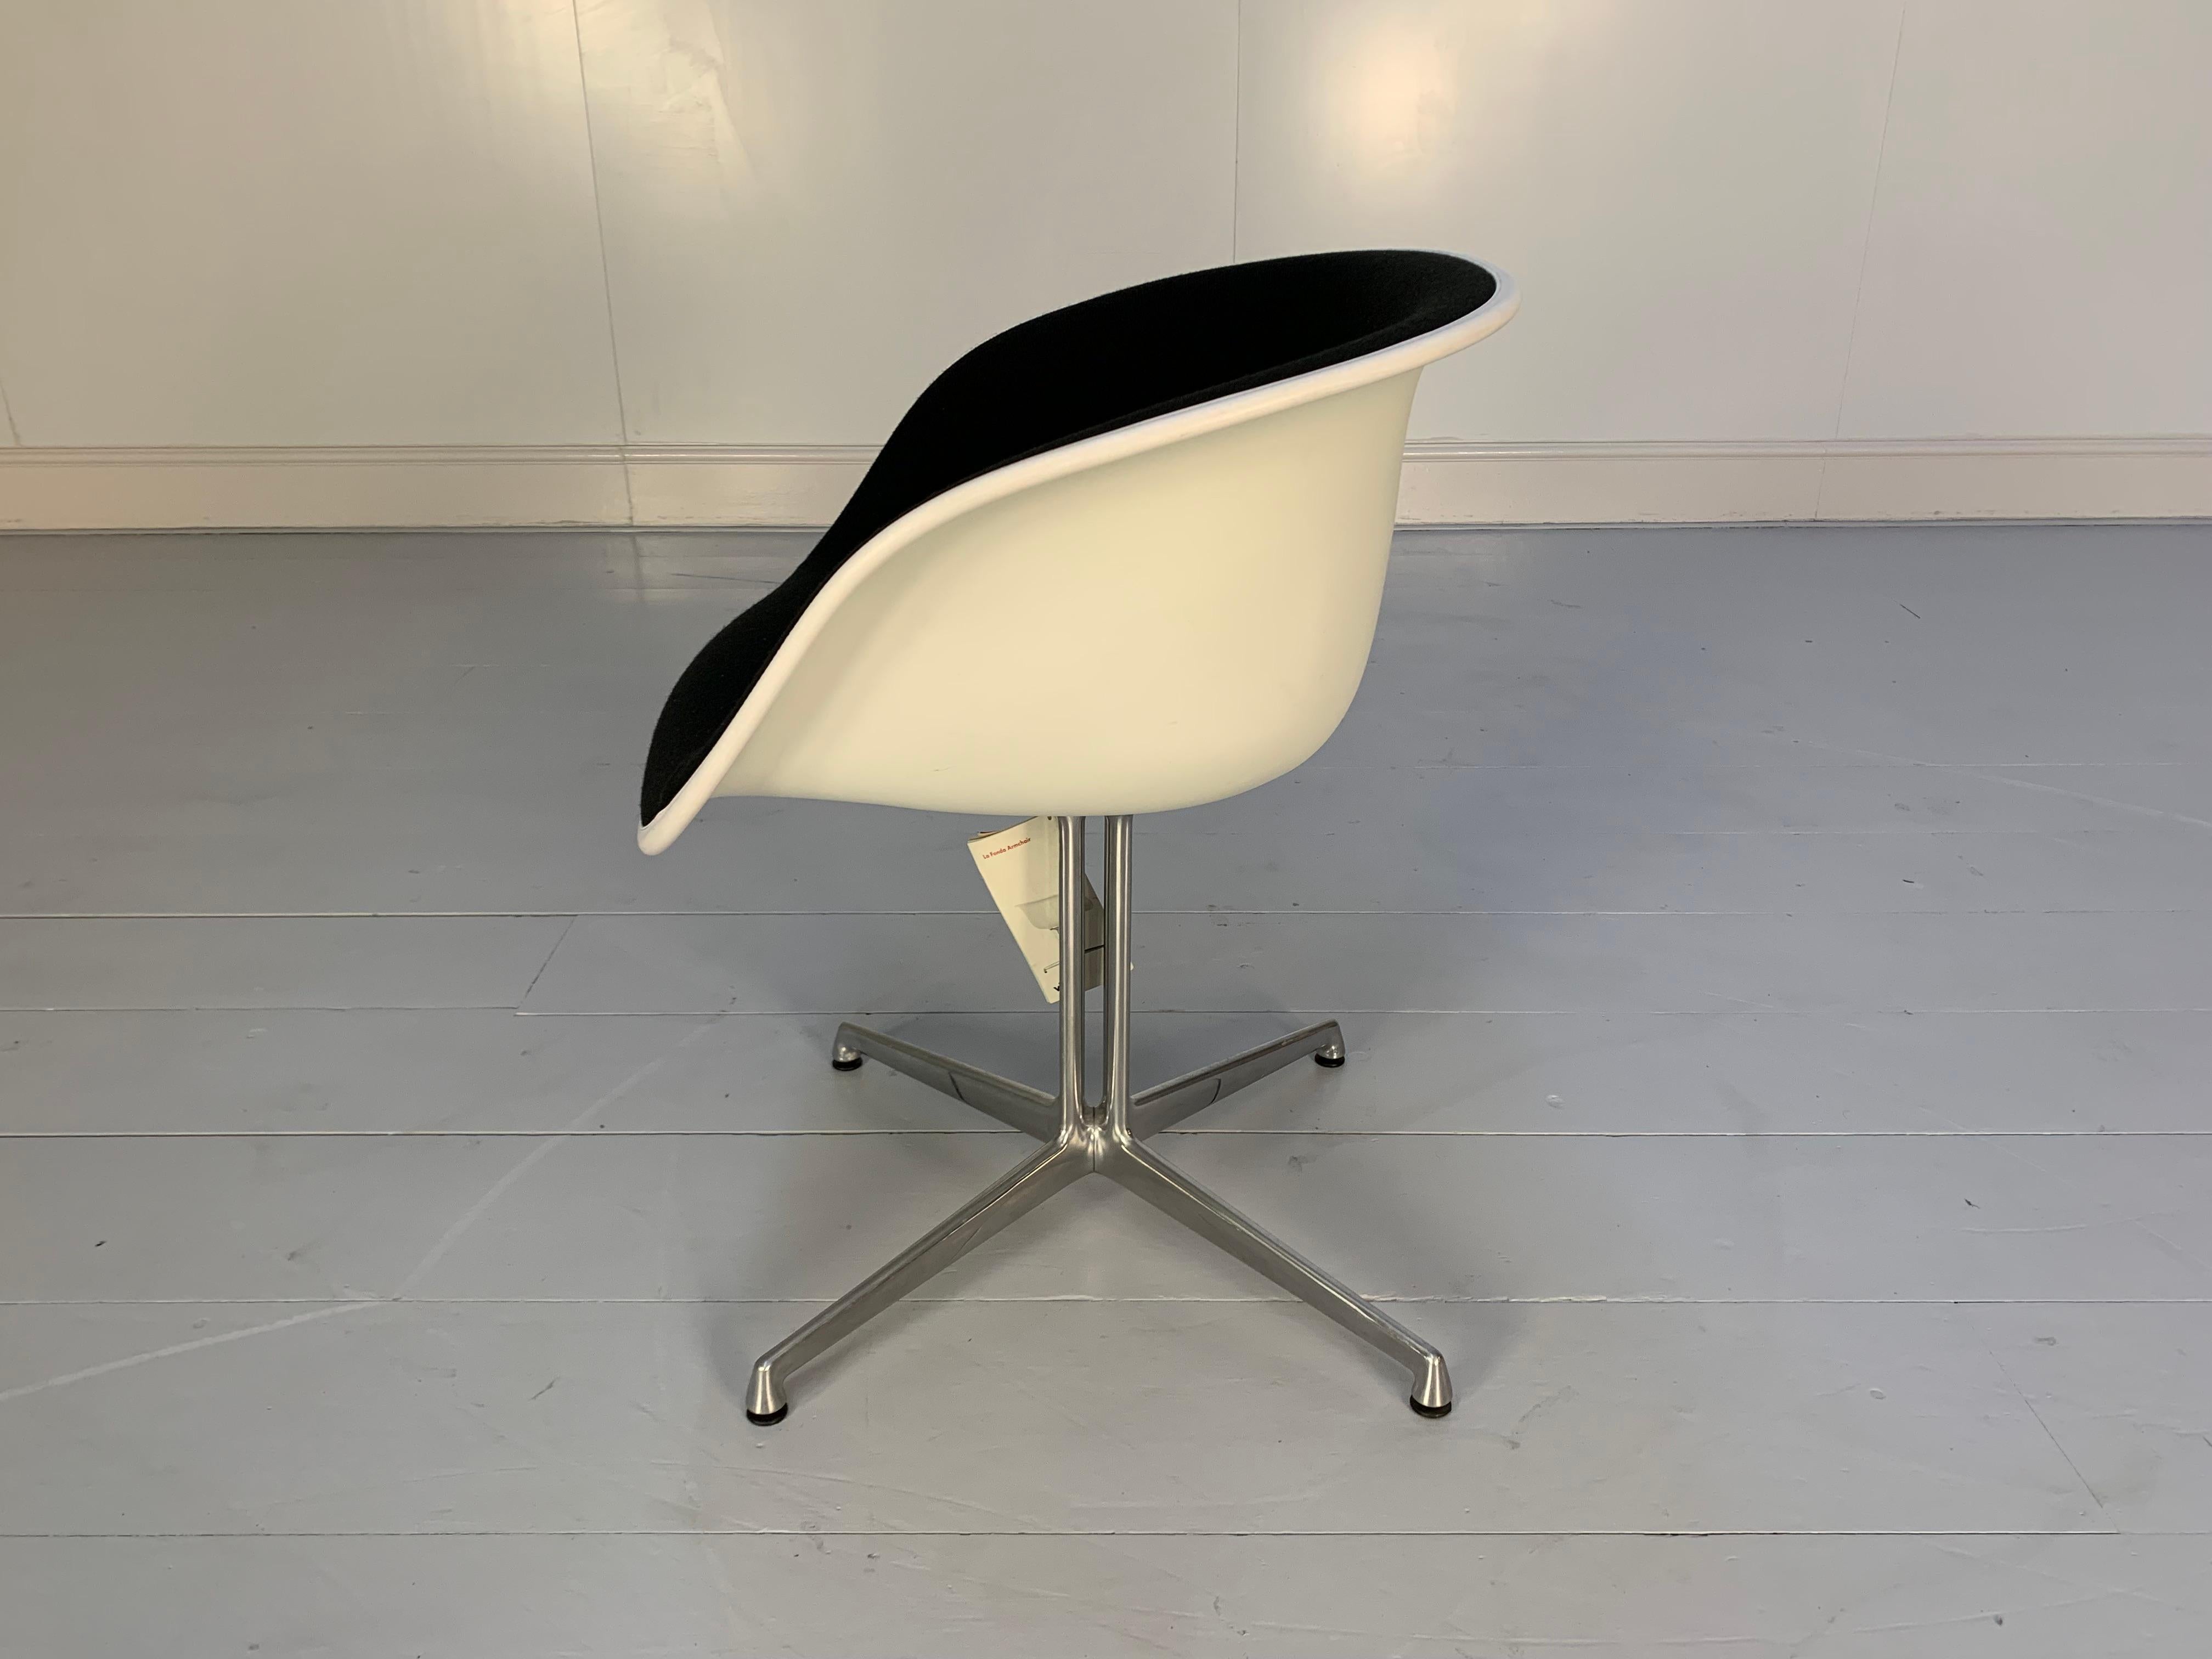 Vitra “La Fonda” Eames Chair & Marble Table in Black Hopsack For Sale 5